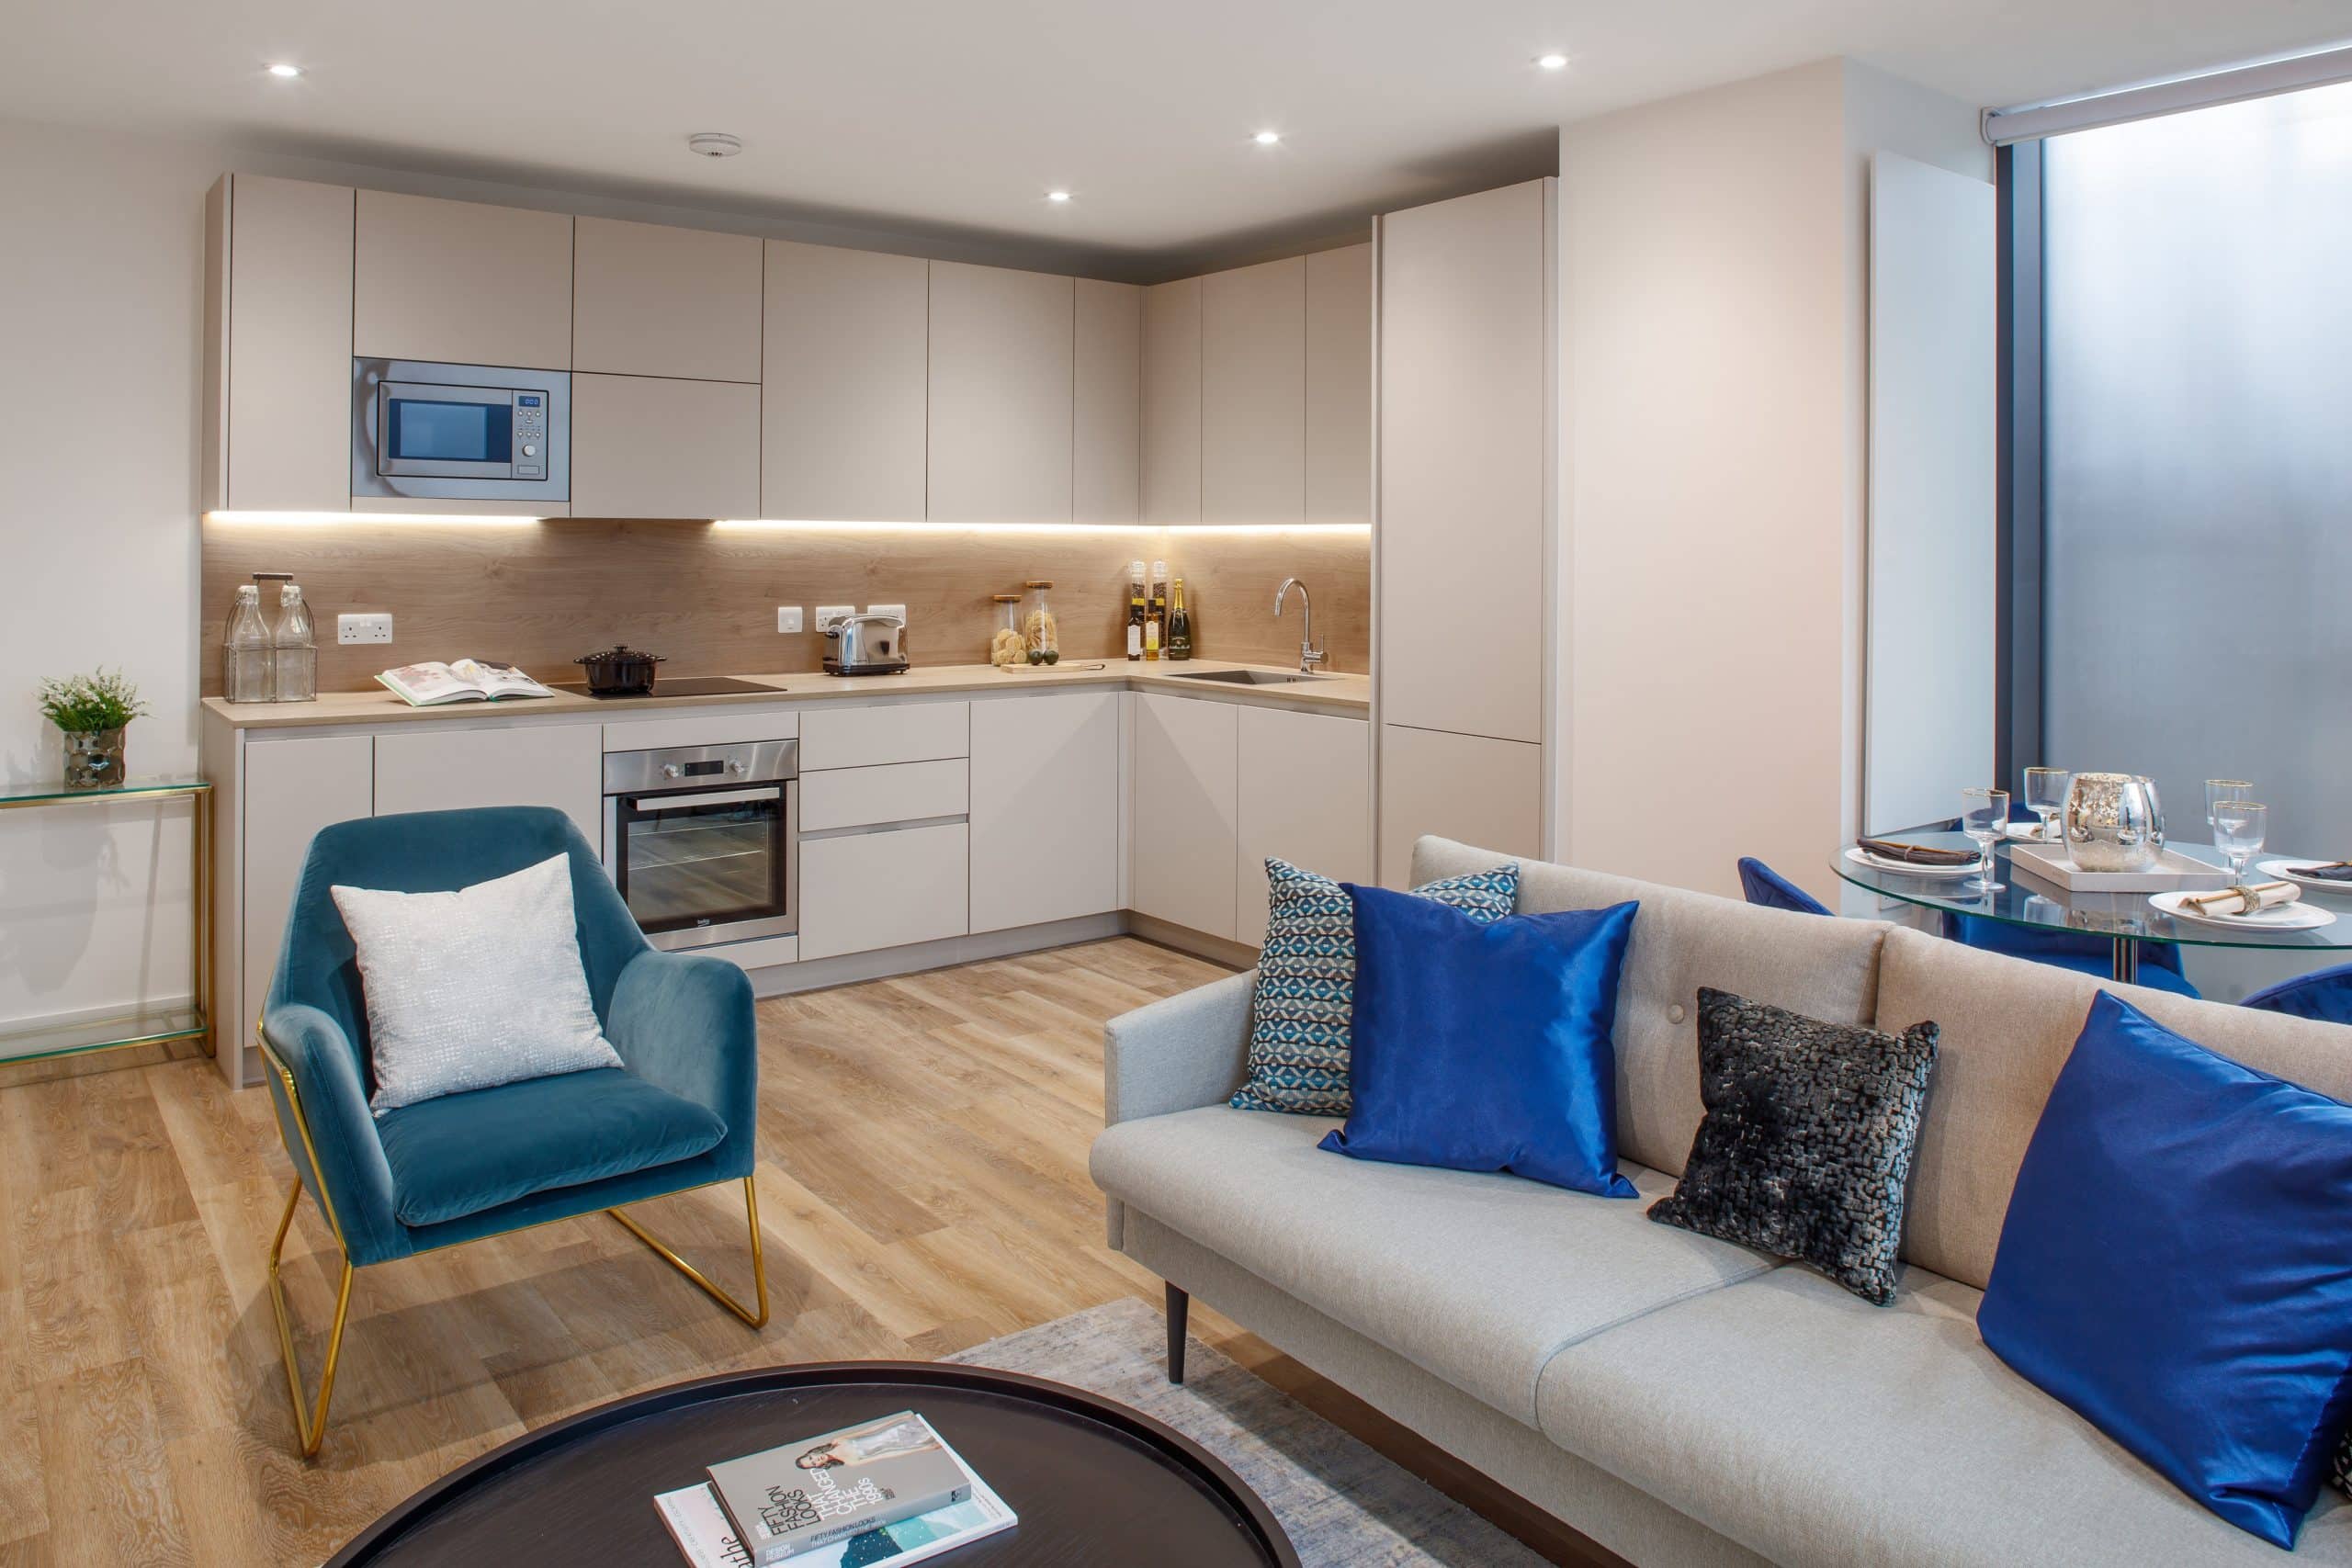 Interior show home photography of L&Q at Queens Quarter development - Shared Ownership and Help to Buy homes available on Share to Buy